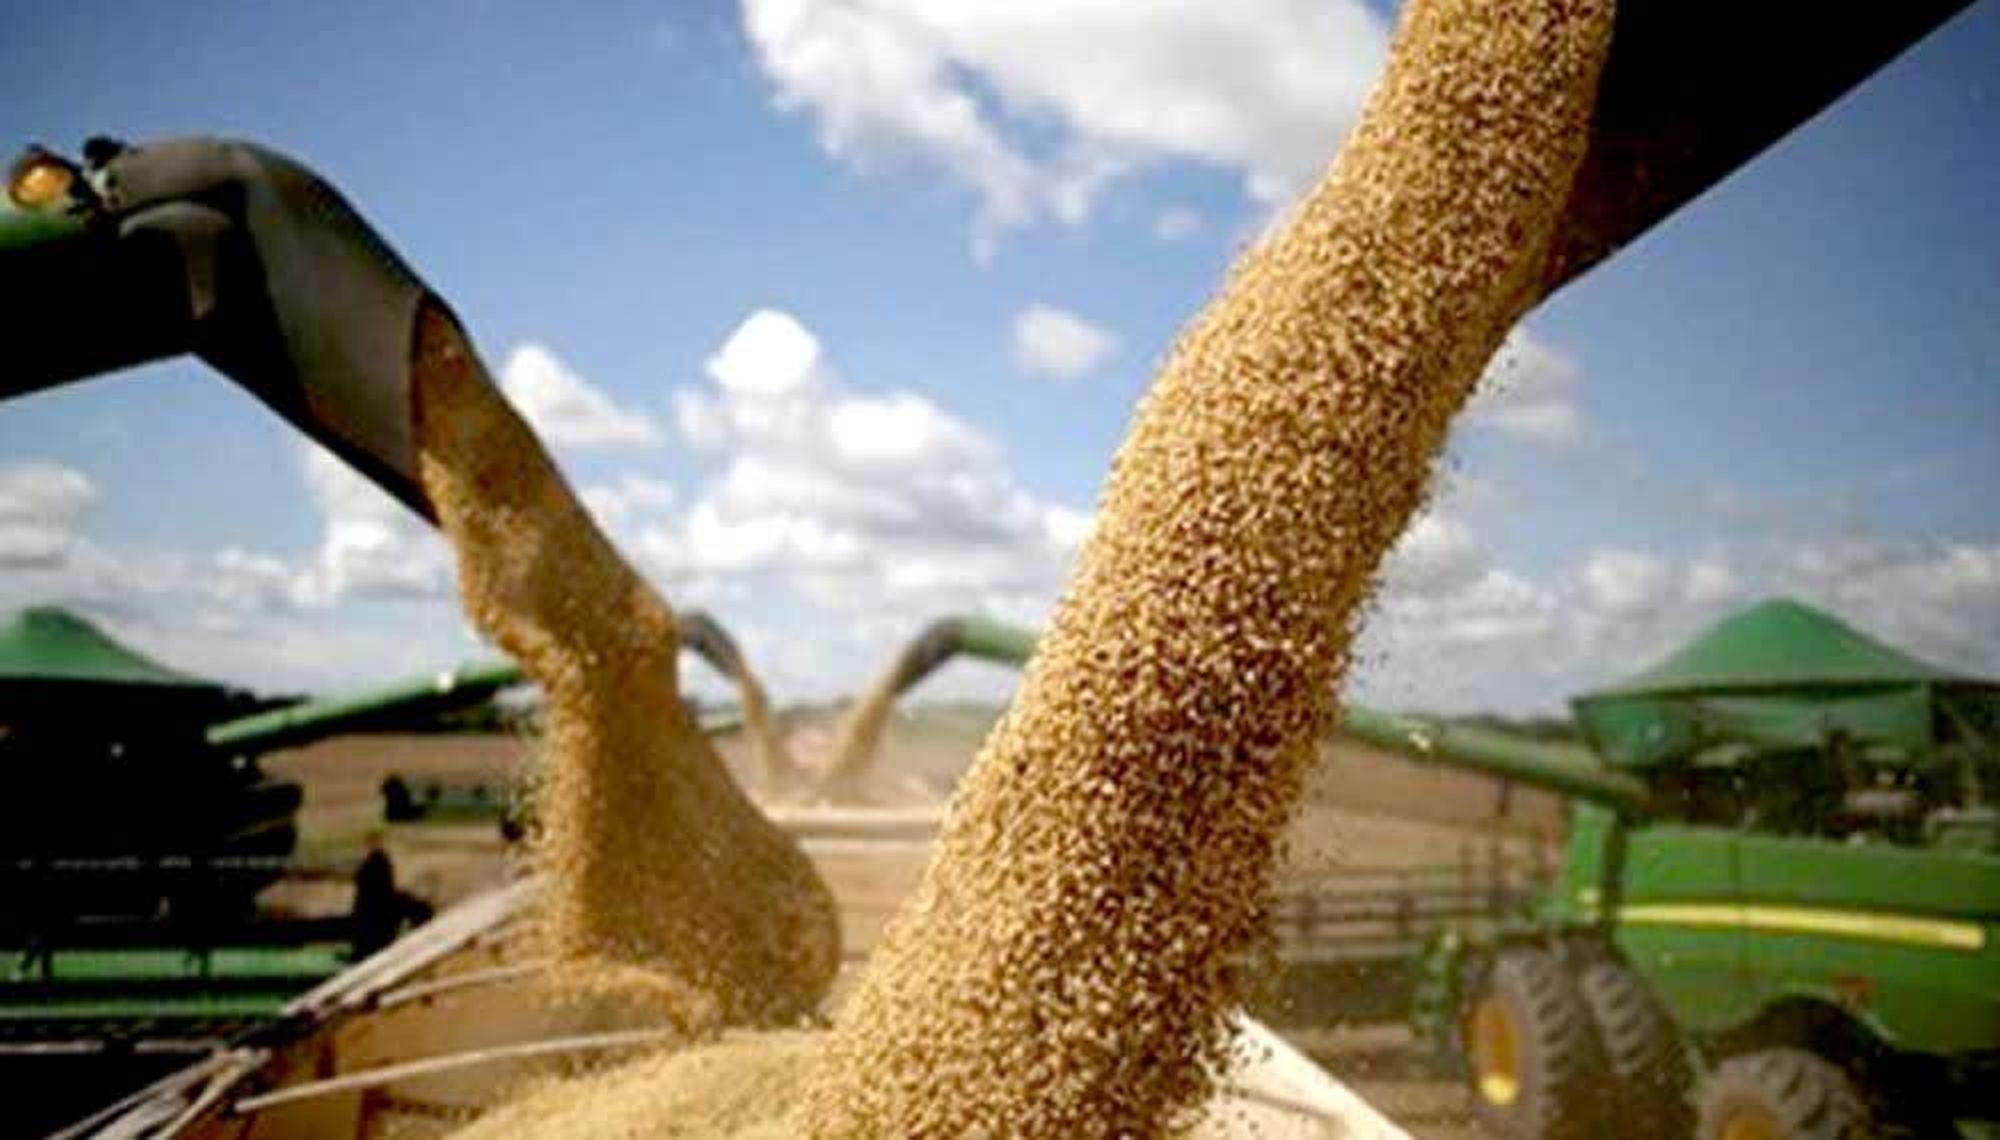 Soy, one of the food commodities Brazil is world's leading exporter